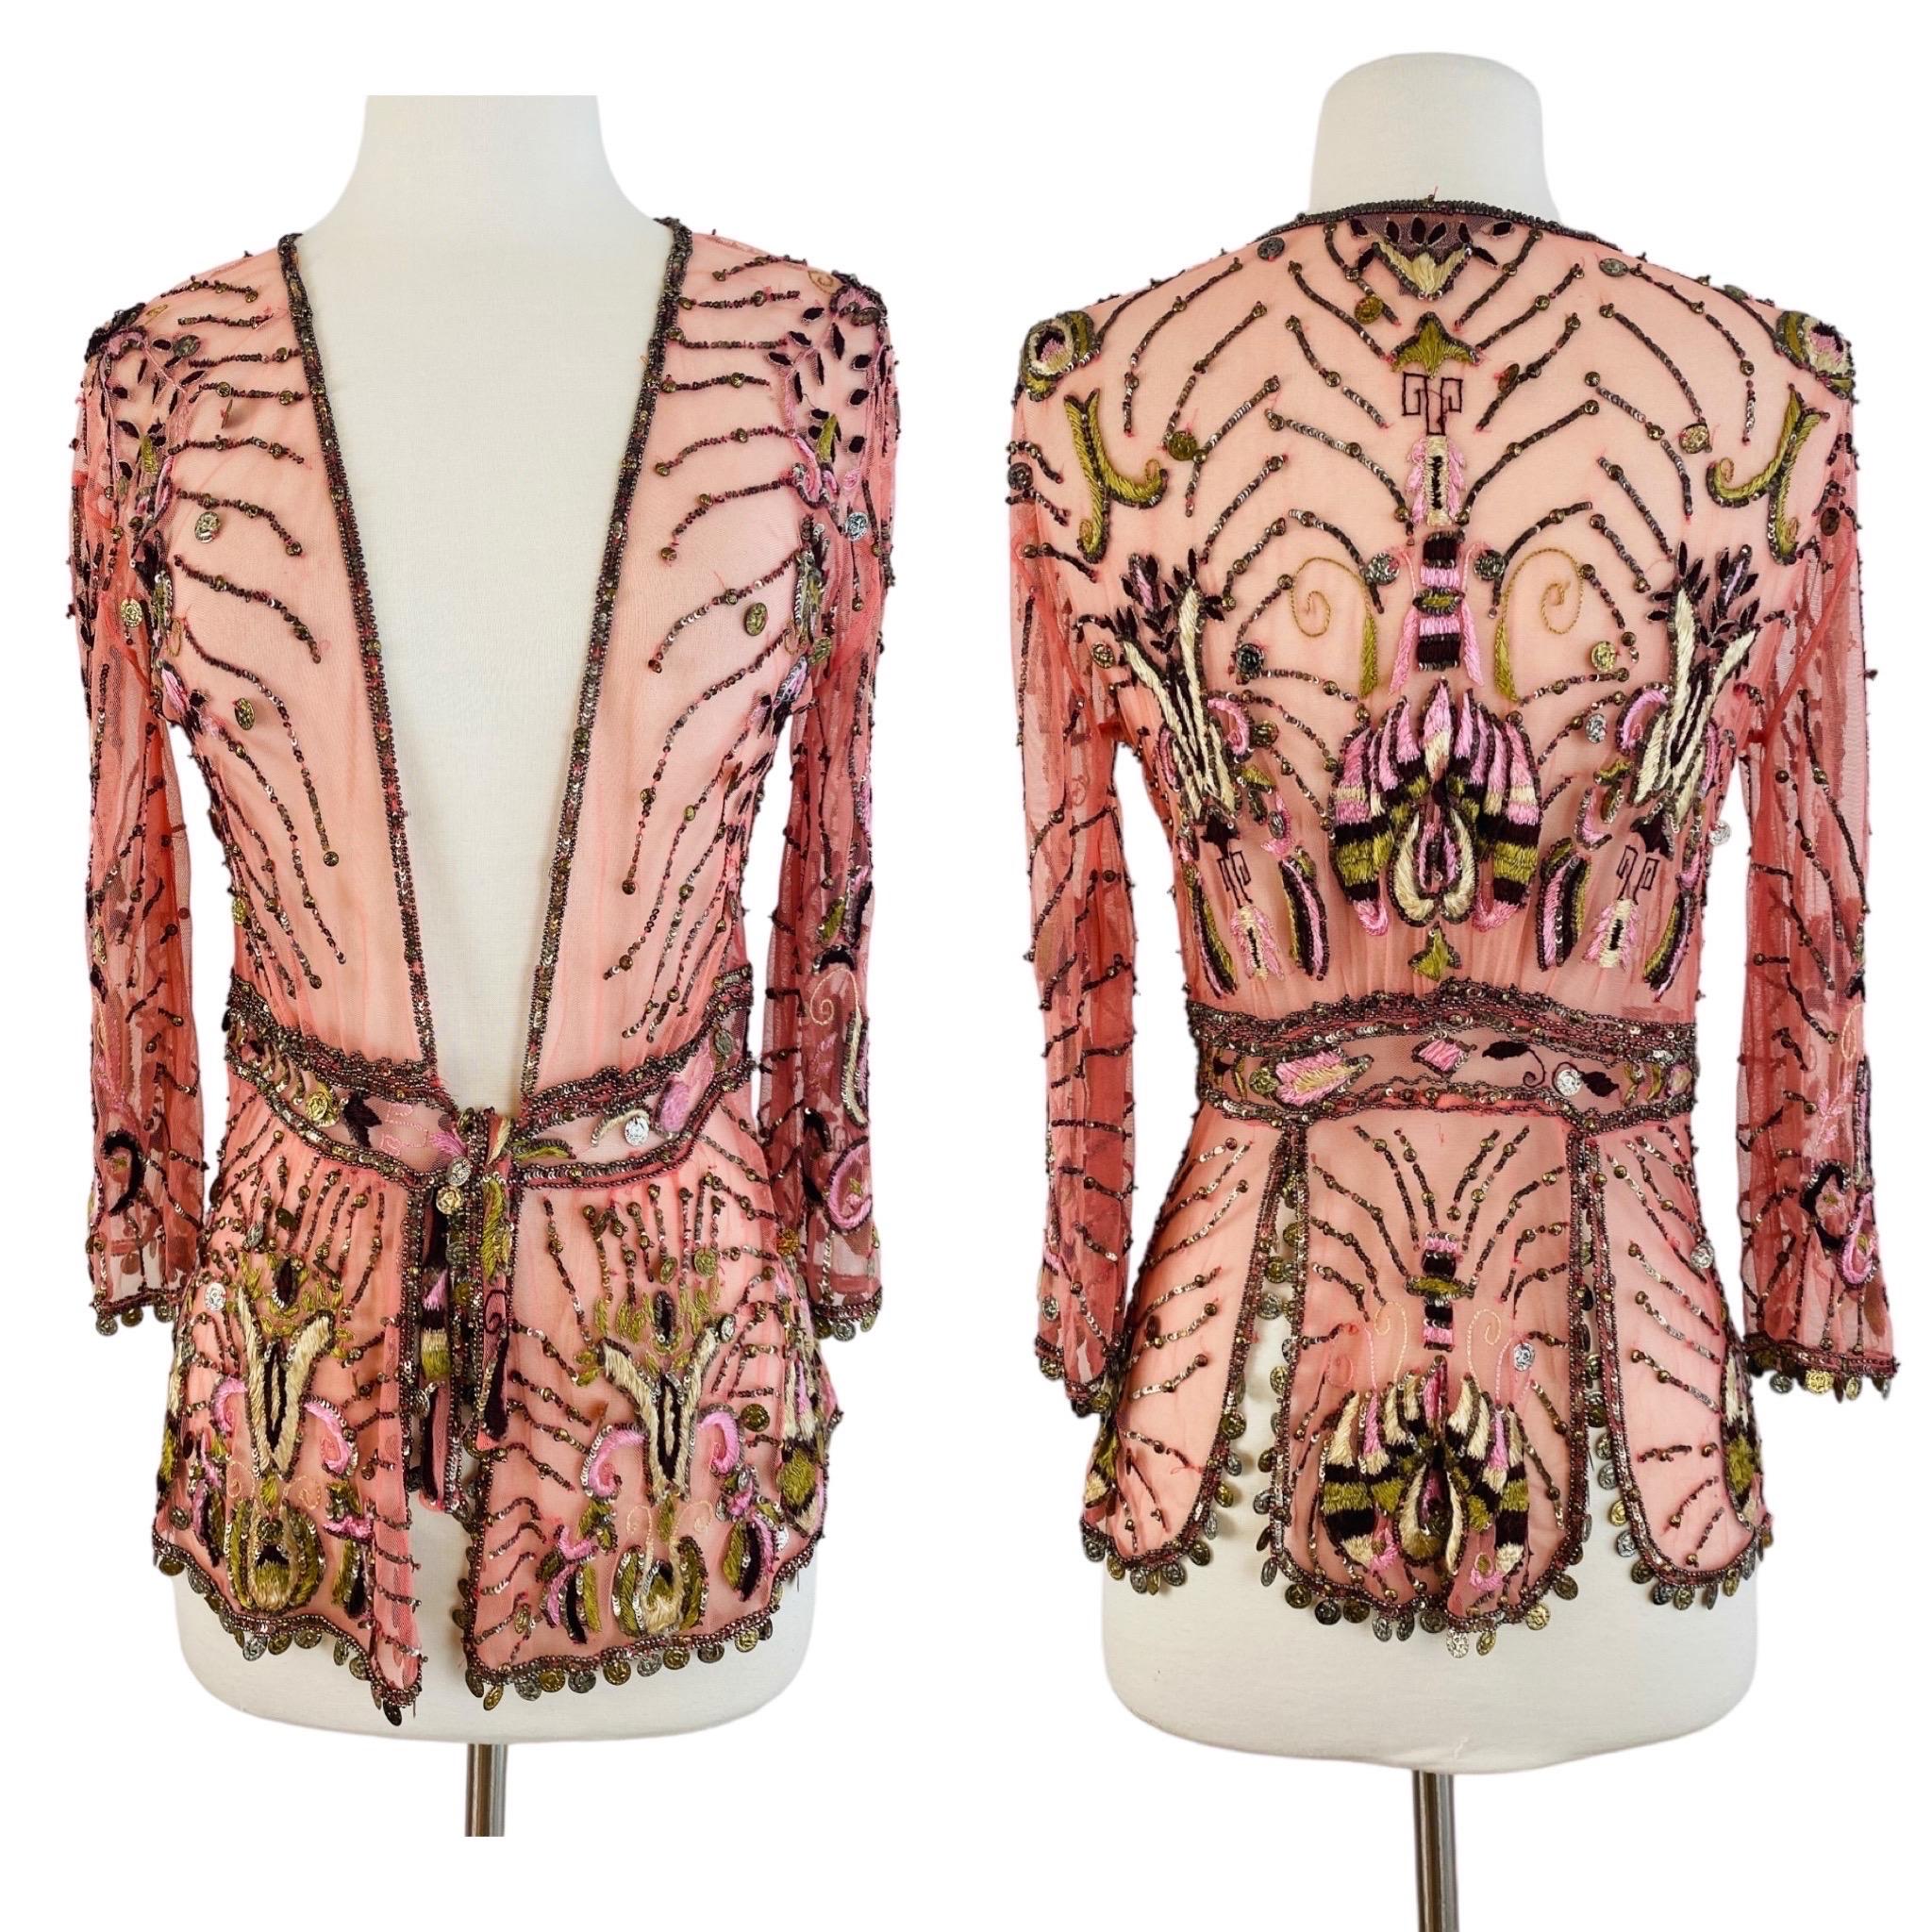 2004 Roberto Cavalli blouse
Pink mesh fabric with embroidery throughout
Gold + silver tone tiny coins throughout + at hem of sleeves + across the bottom (does make jingly noise)
Deep V open style beaded neckline
Long 3/4 tapered sleeves
Fitted